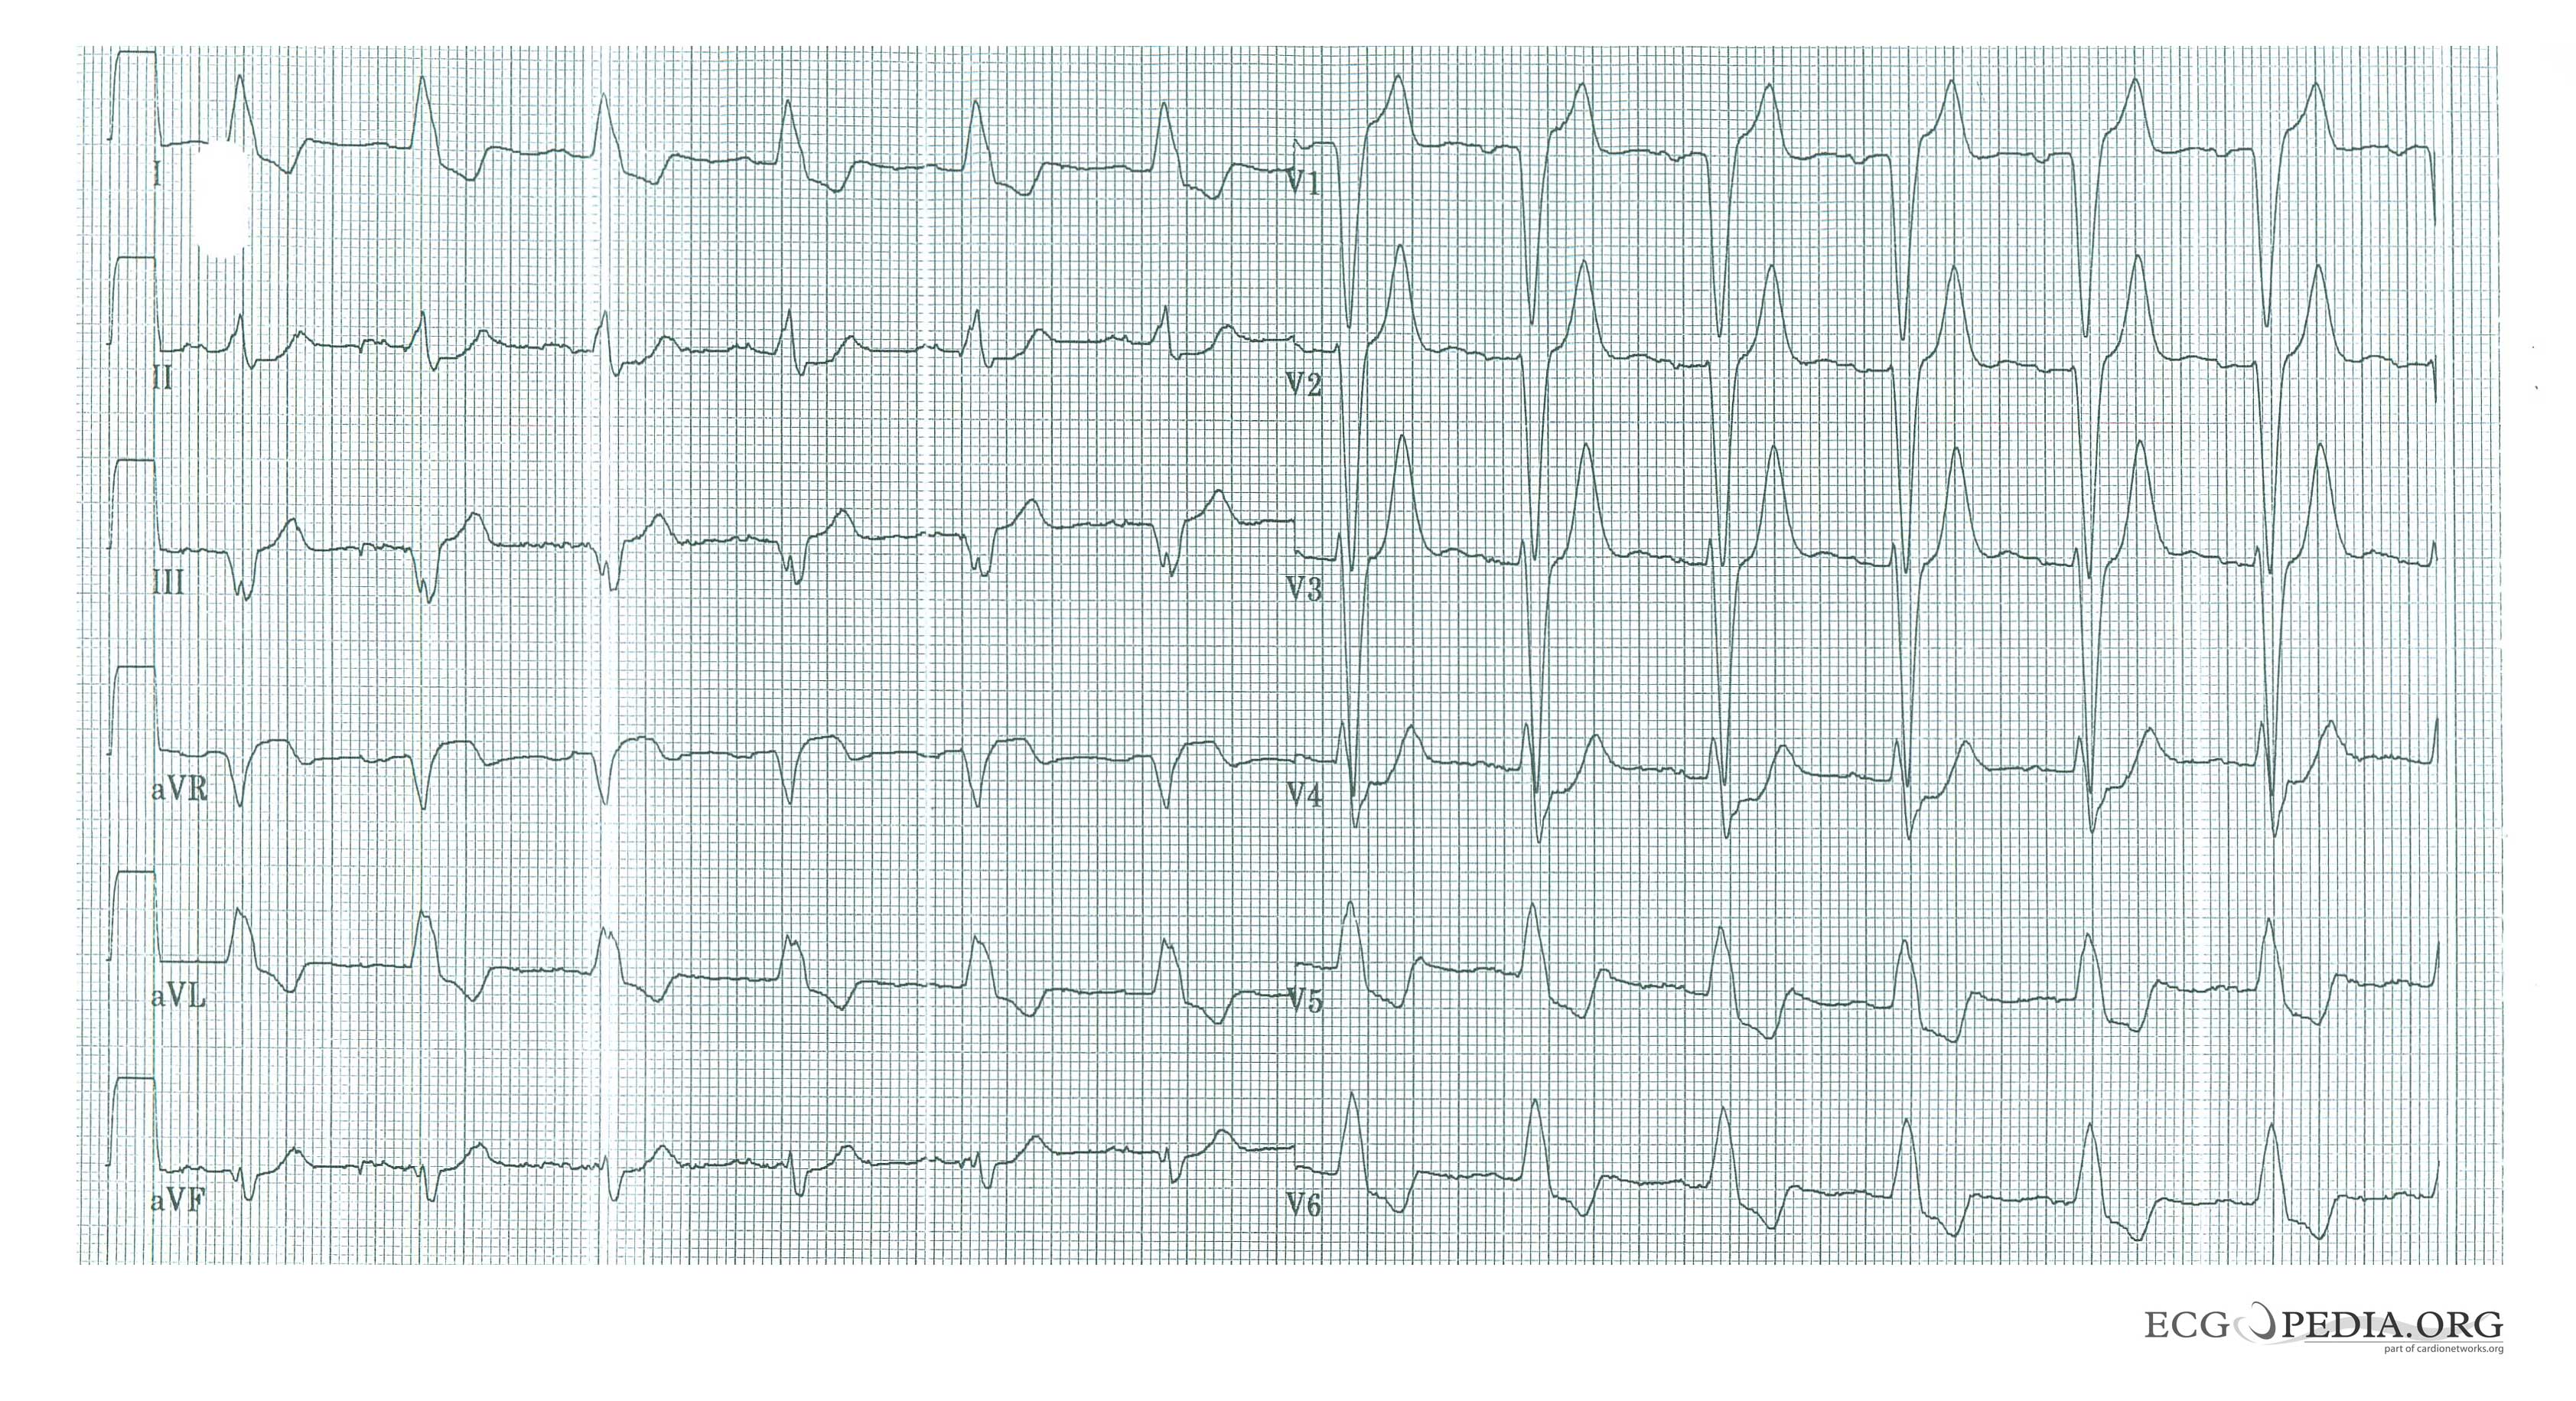 Acute MI in a patient with LBBB